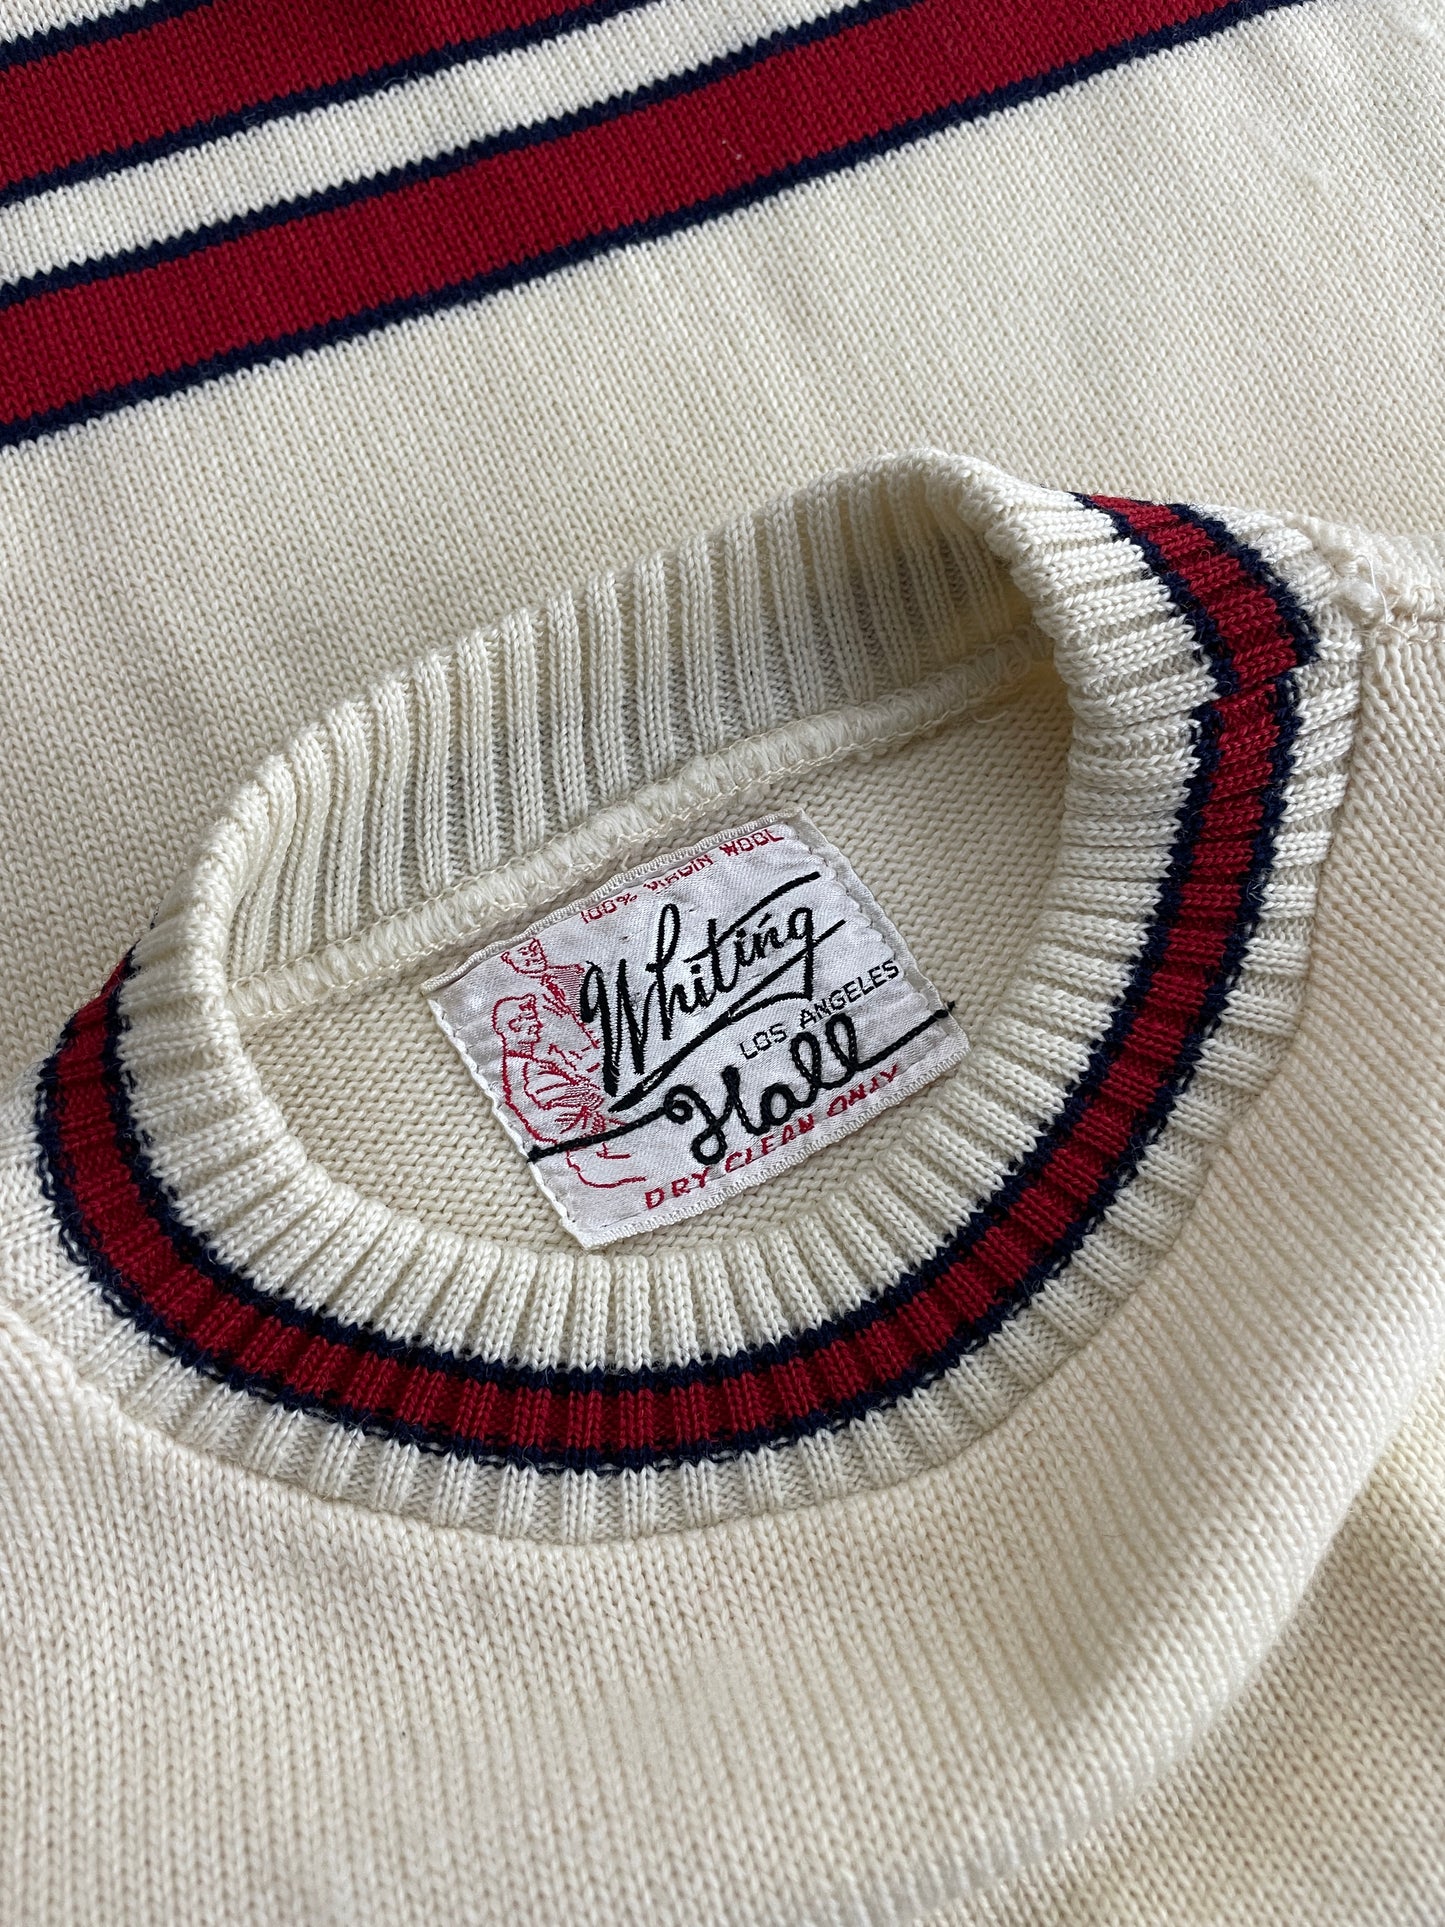 60's Whiting College Sweater [M]